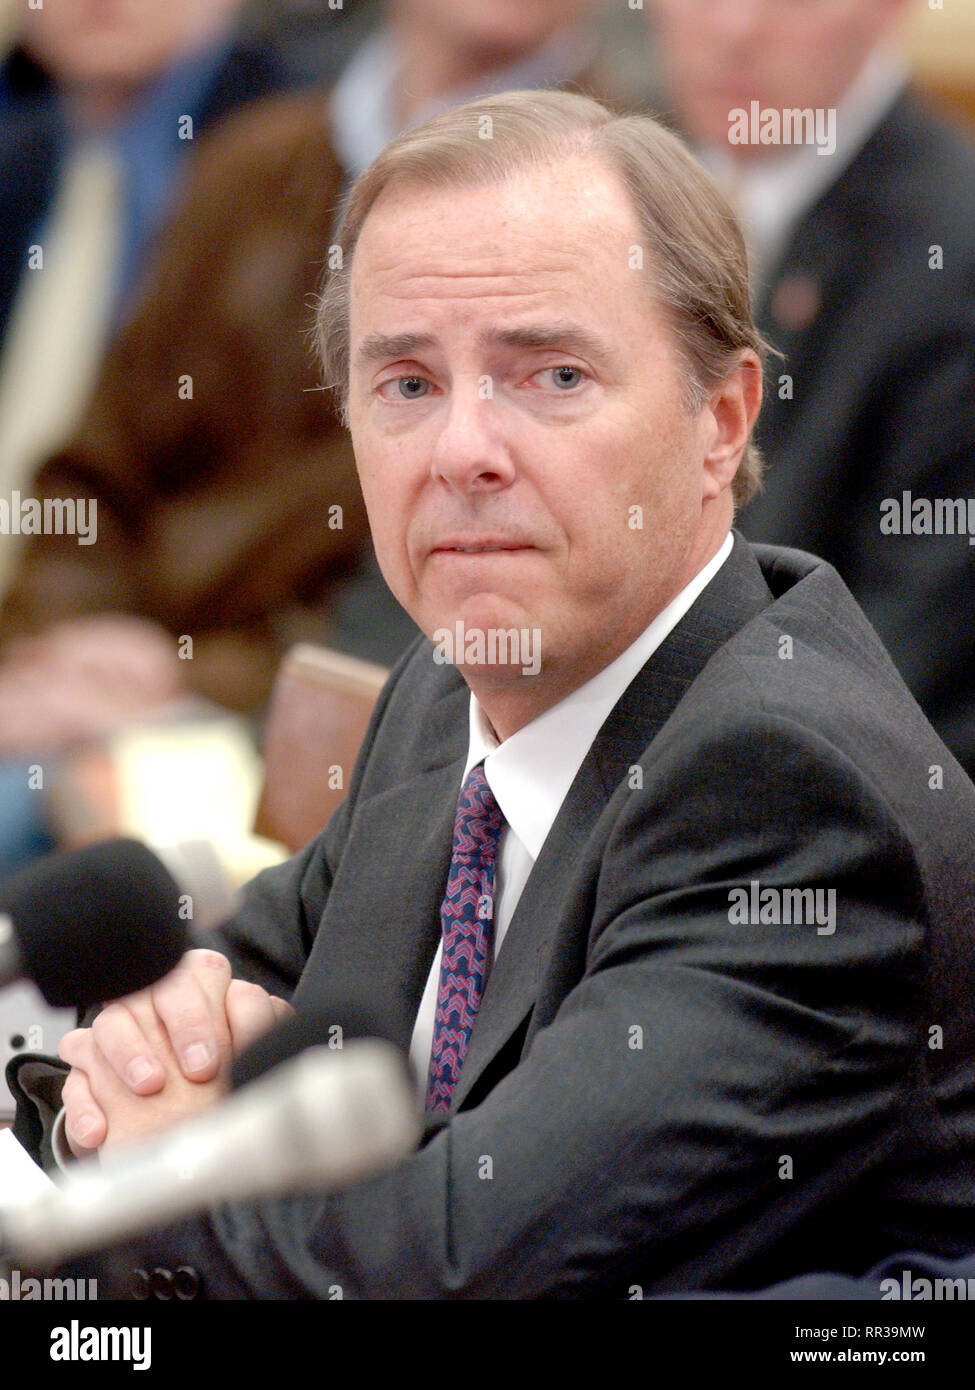 Washington, DC - February 7, 2002 --Jeffrey K. Skilling, former President and CEO; Enron Corporation, nervously awaits his being sworn-in to testify before a hearing of the United States House of Representatives Energy and Commerce Subcommittee on Oversight and Investigations on 'The Financial Collapse of the Enron Corporation'..Credit: Ron Sachs / CNP /MediaPunch Stock Photo